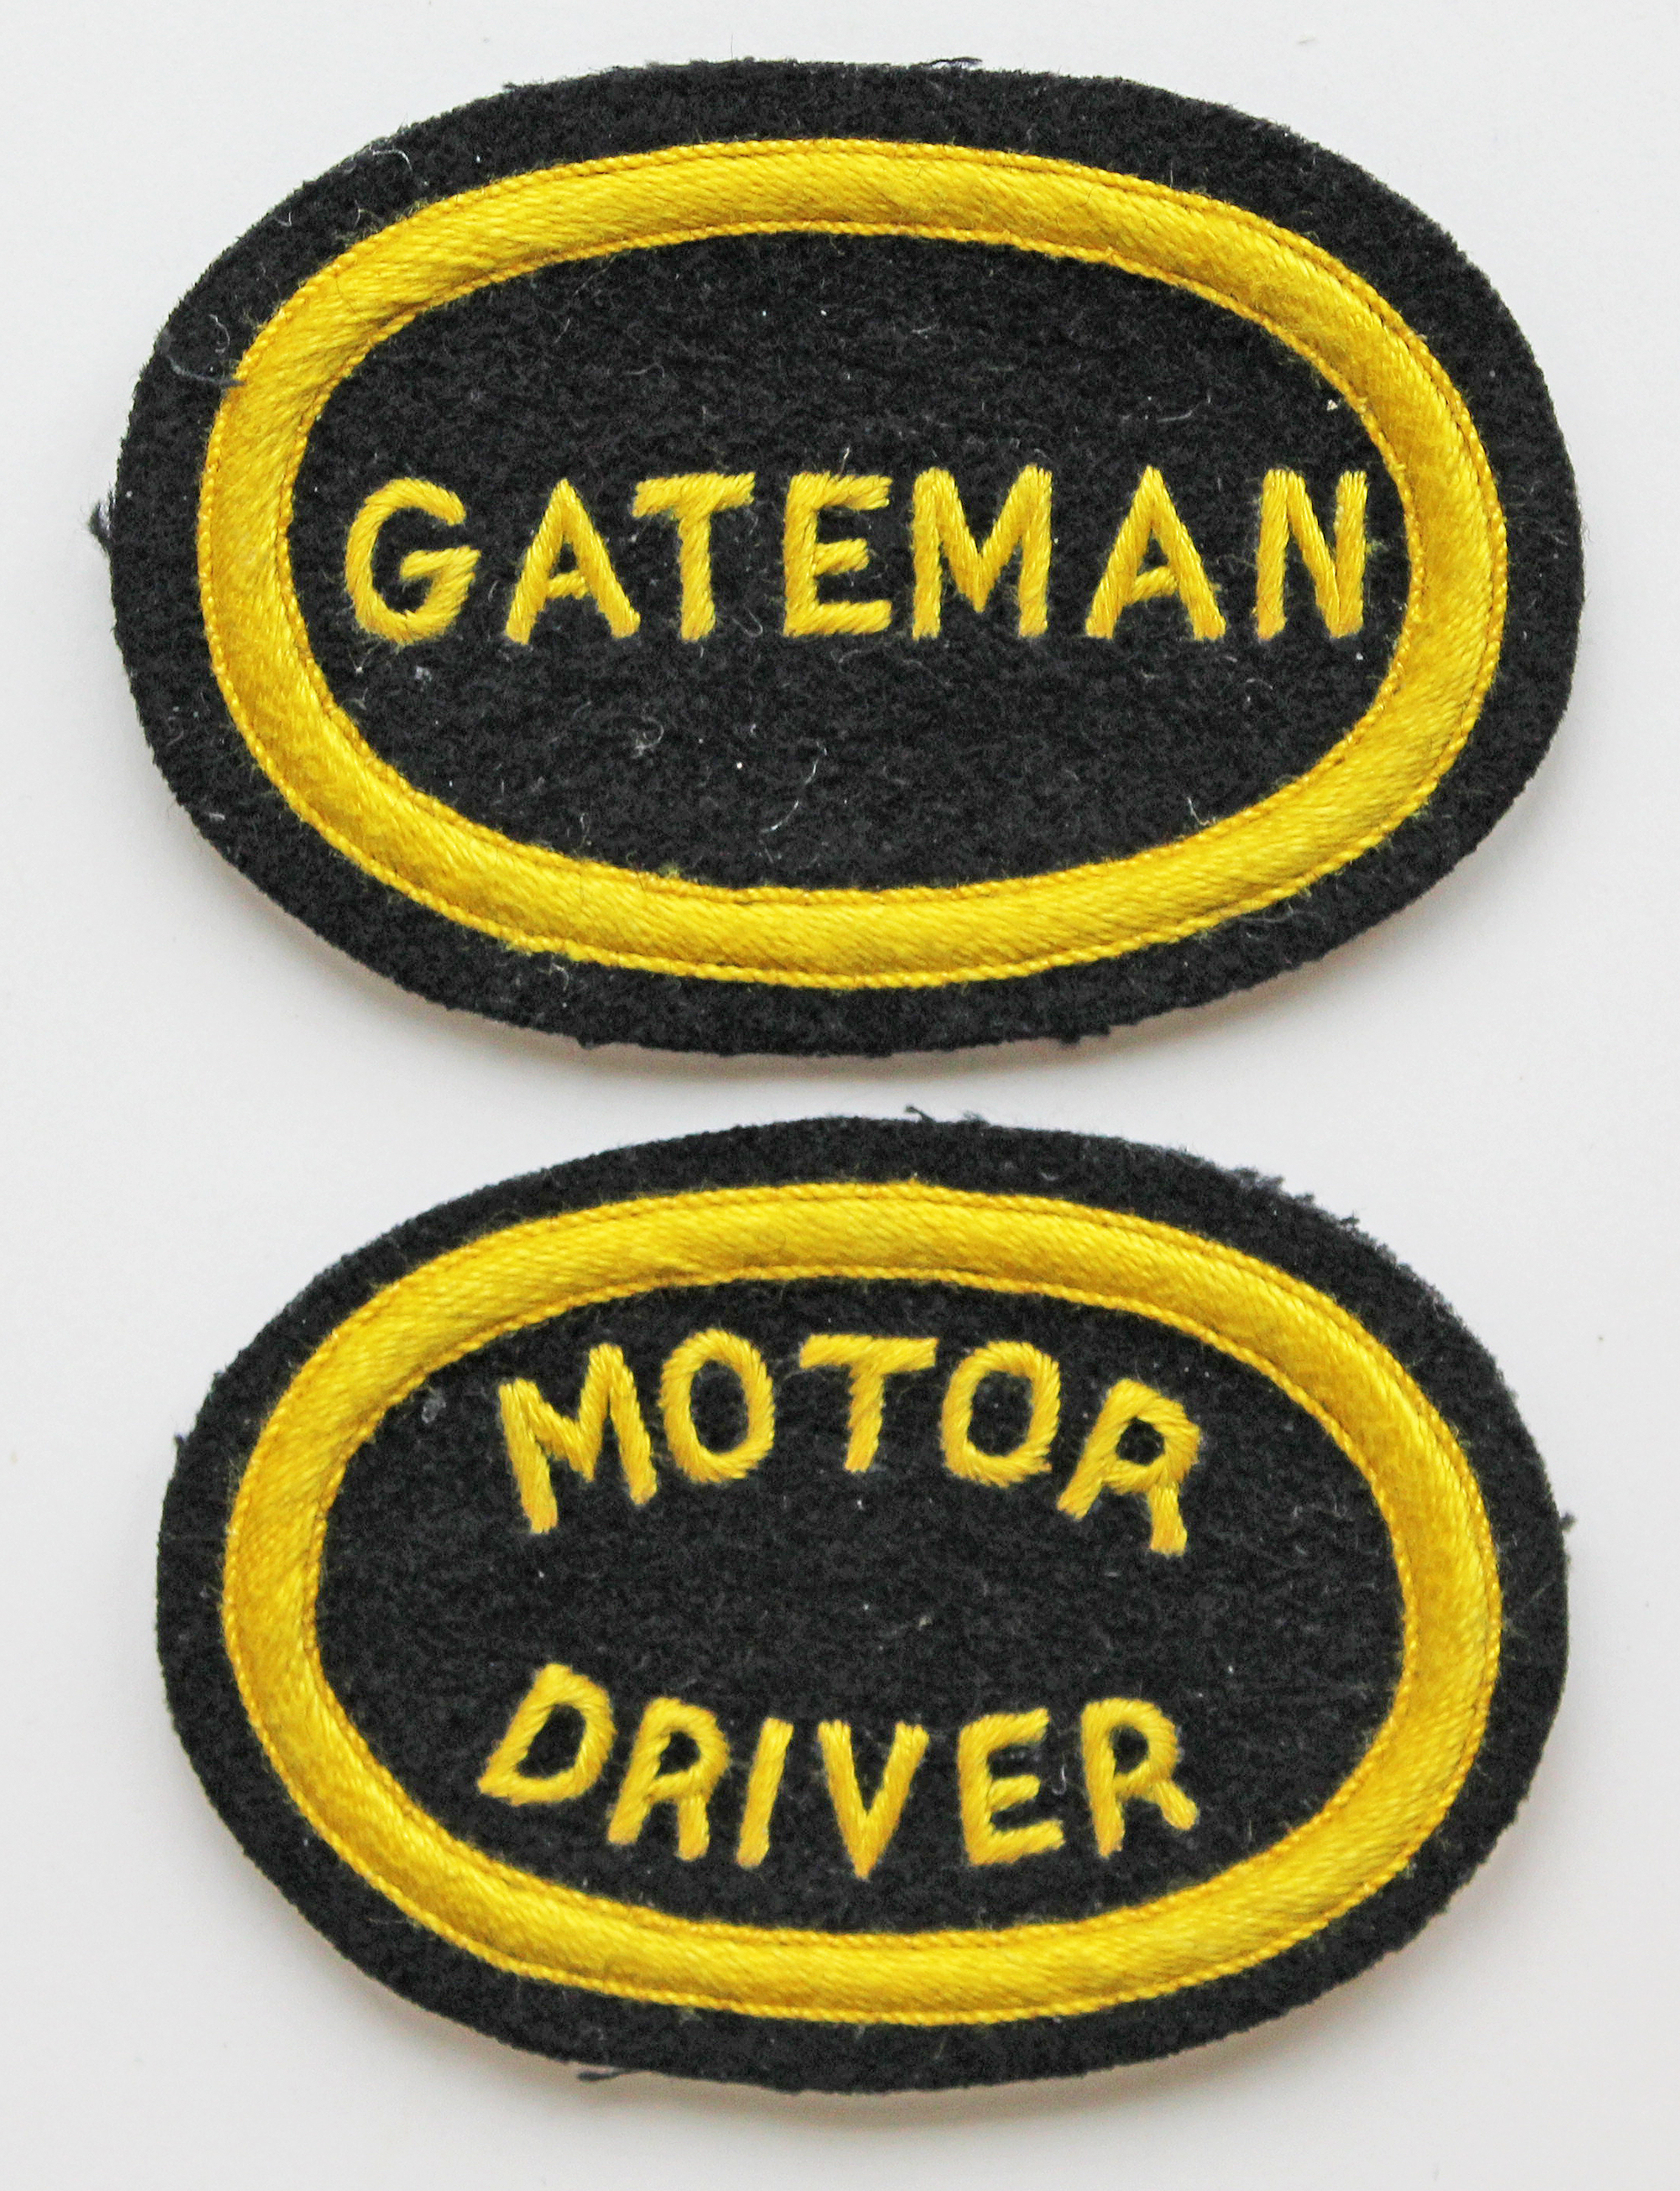 Southern Railway pre 1934 embroidered capbadges, quantity 2, GATEMAN and MOTOR DRIVER. Both yellow